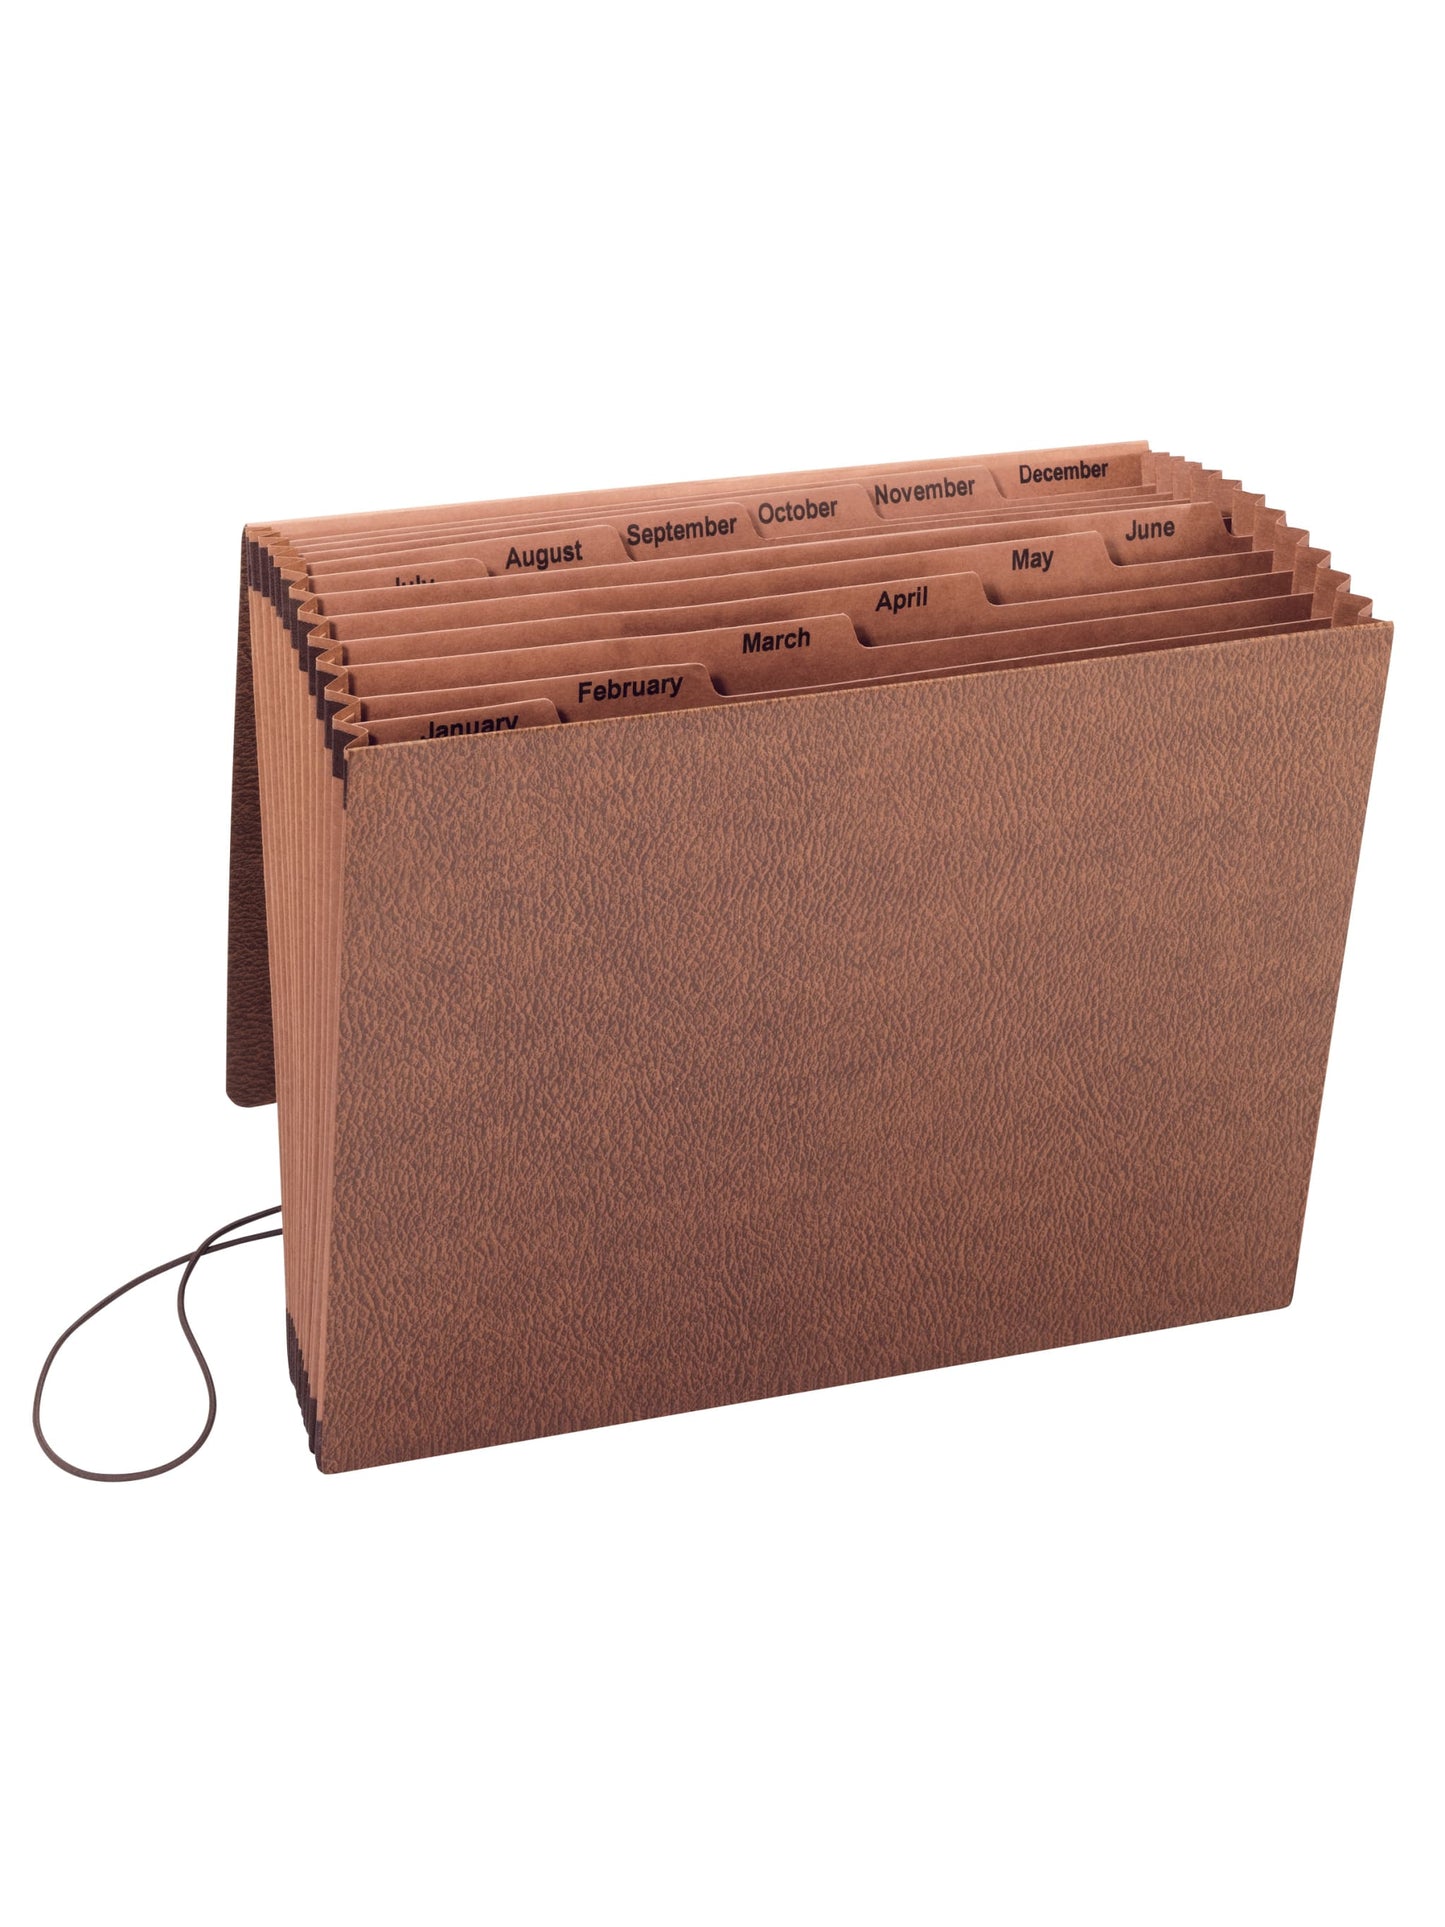 TUFF® Expanding Files with Flap and Elastic Cord, 12 Pocket, 11 Divider, Brown Color, Letter Size, Set of 1, 086486703888